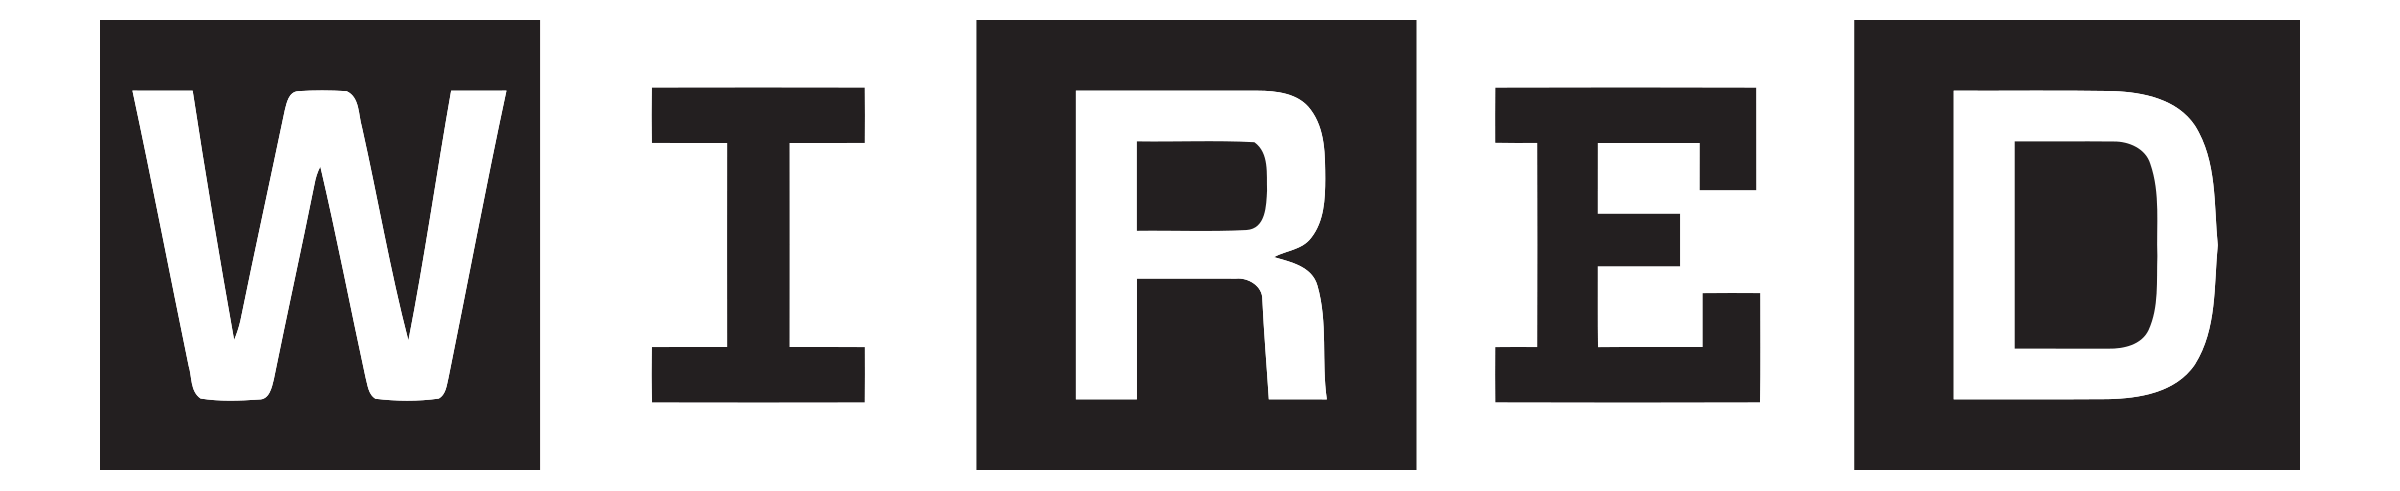 "Wired" logo